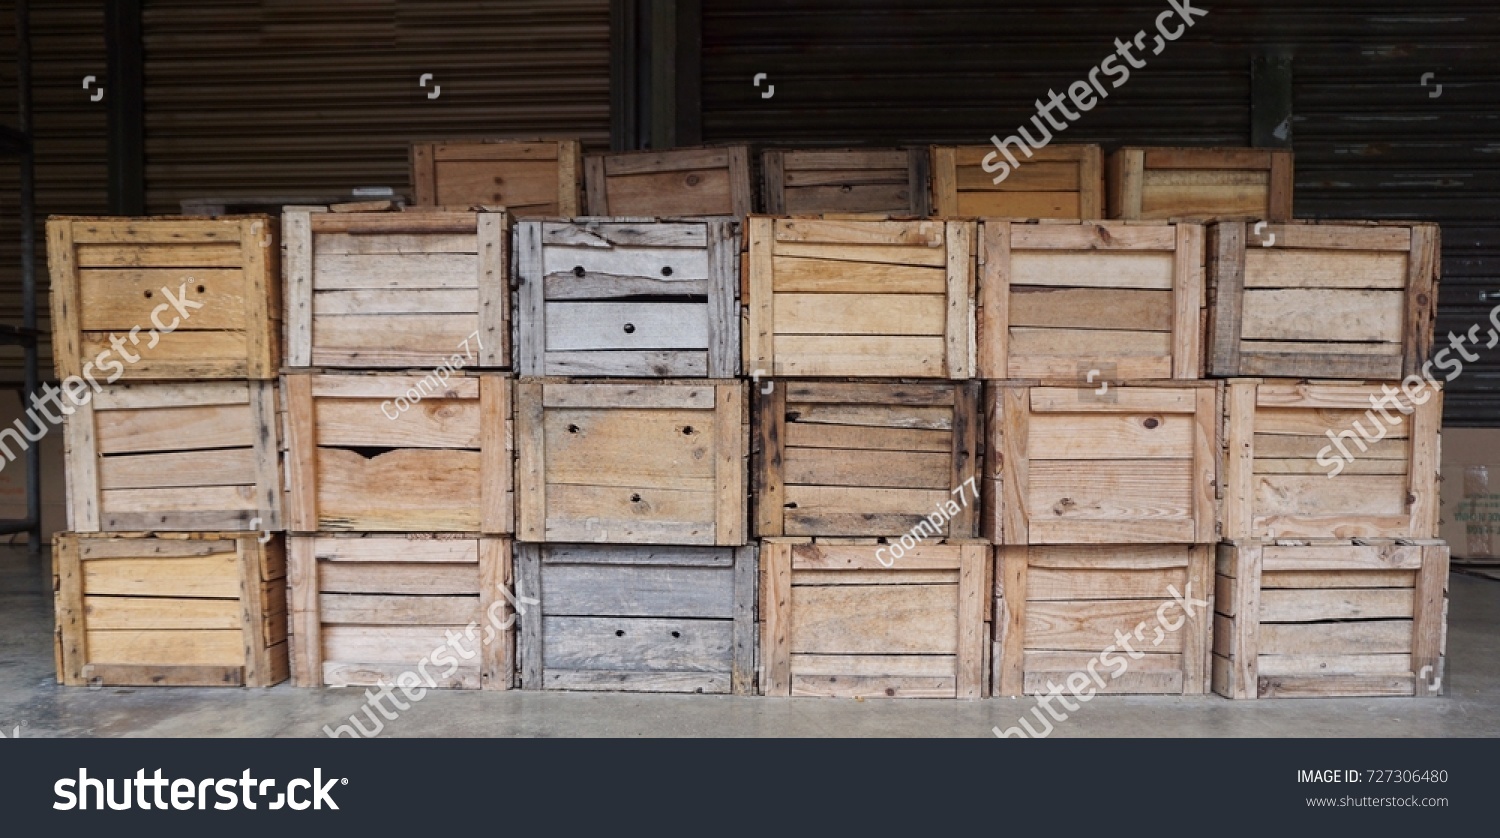 Empty wooden crates or boxes for fruits and vegetables at the market in PERAK, MALAYSIA. #727306480